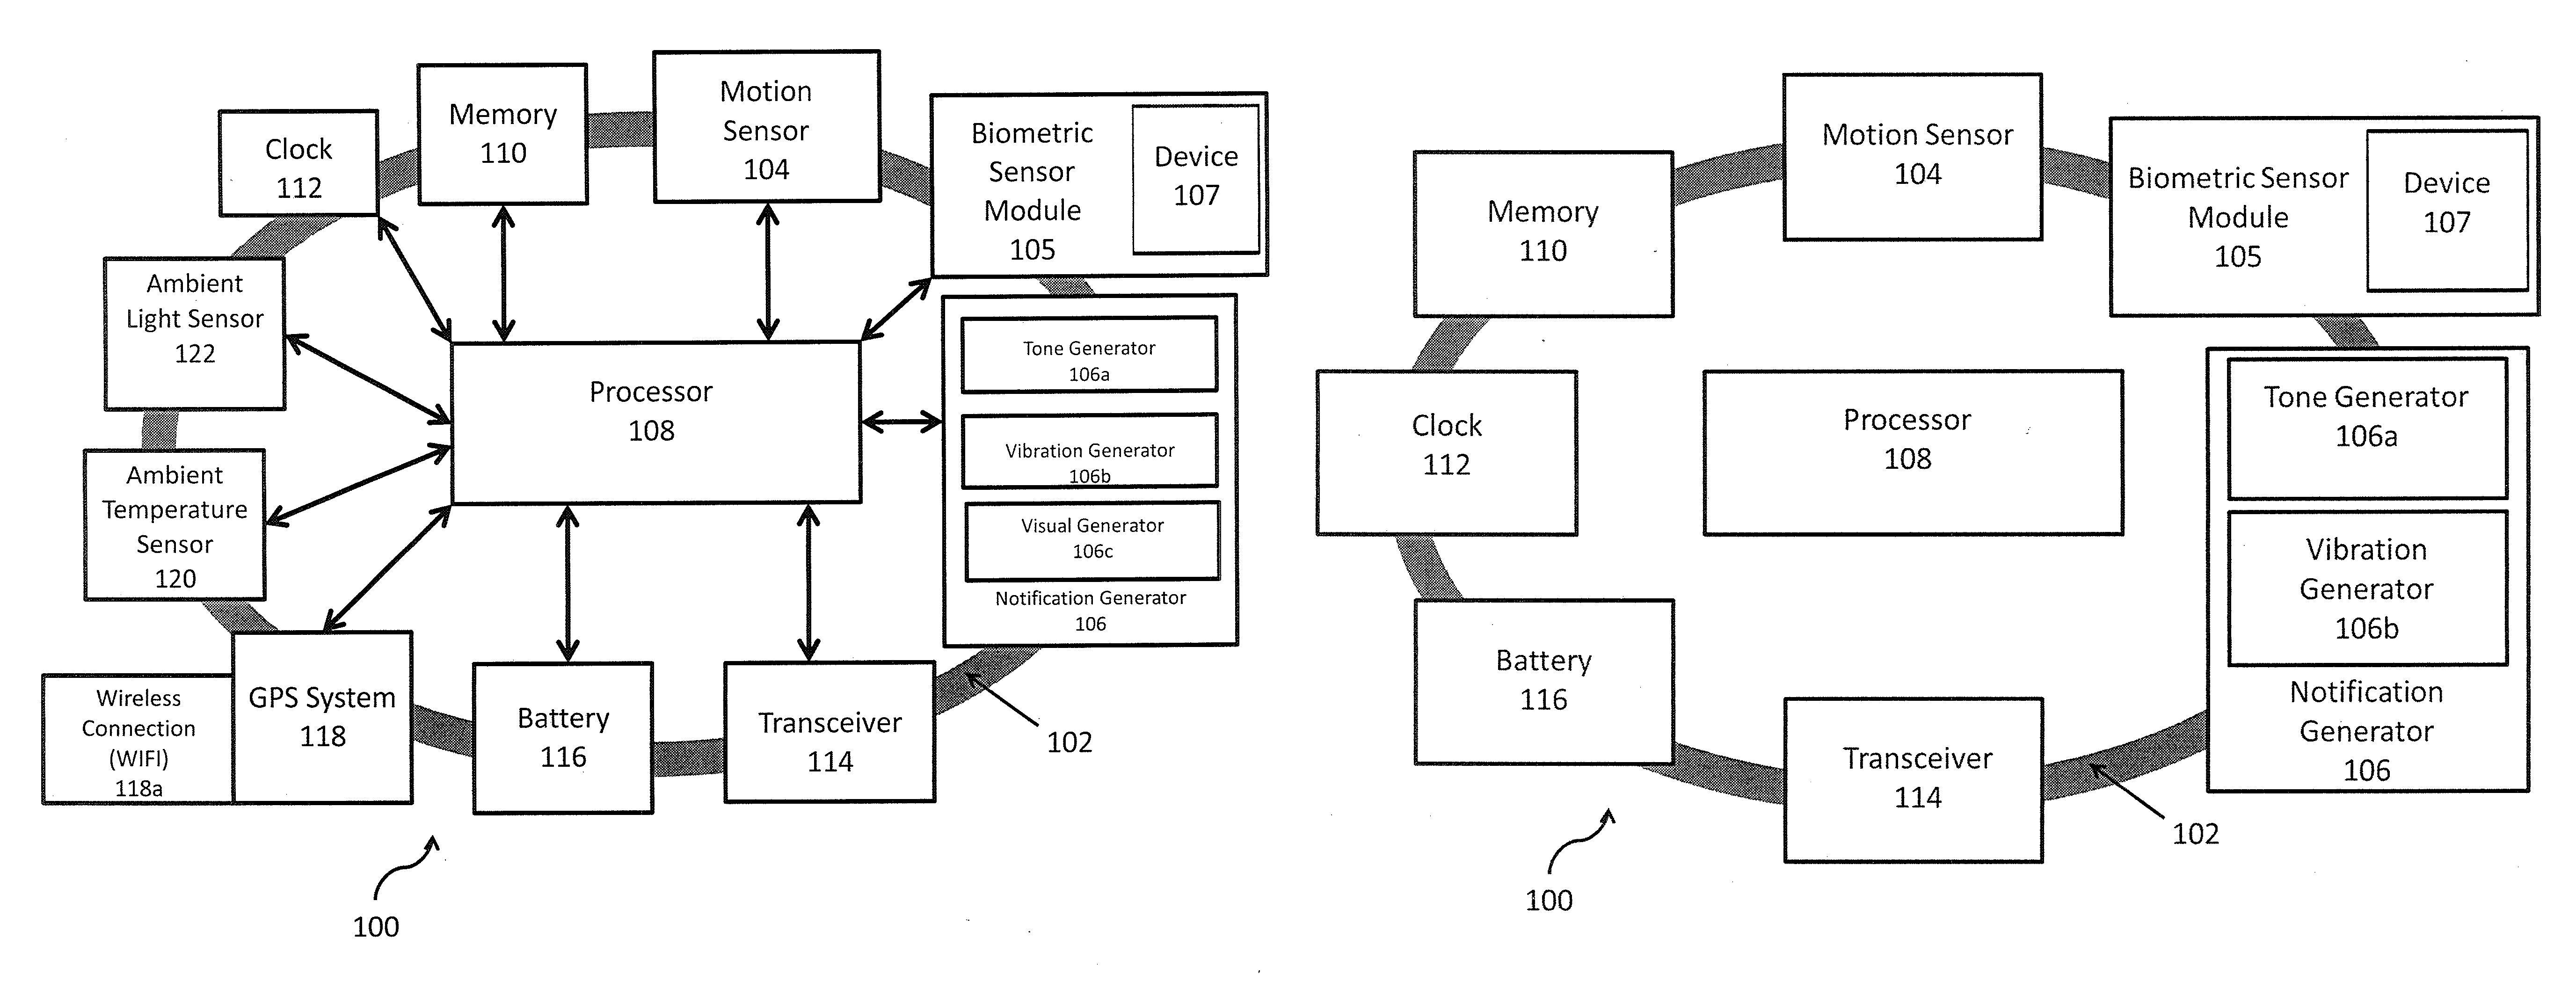 Systems, methods, and apparatus for monitoring alertness of an individual utilizing a wearable device and providing notification